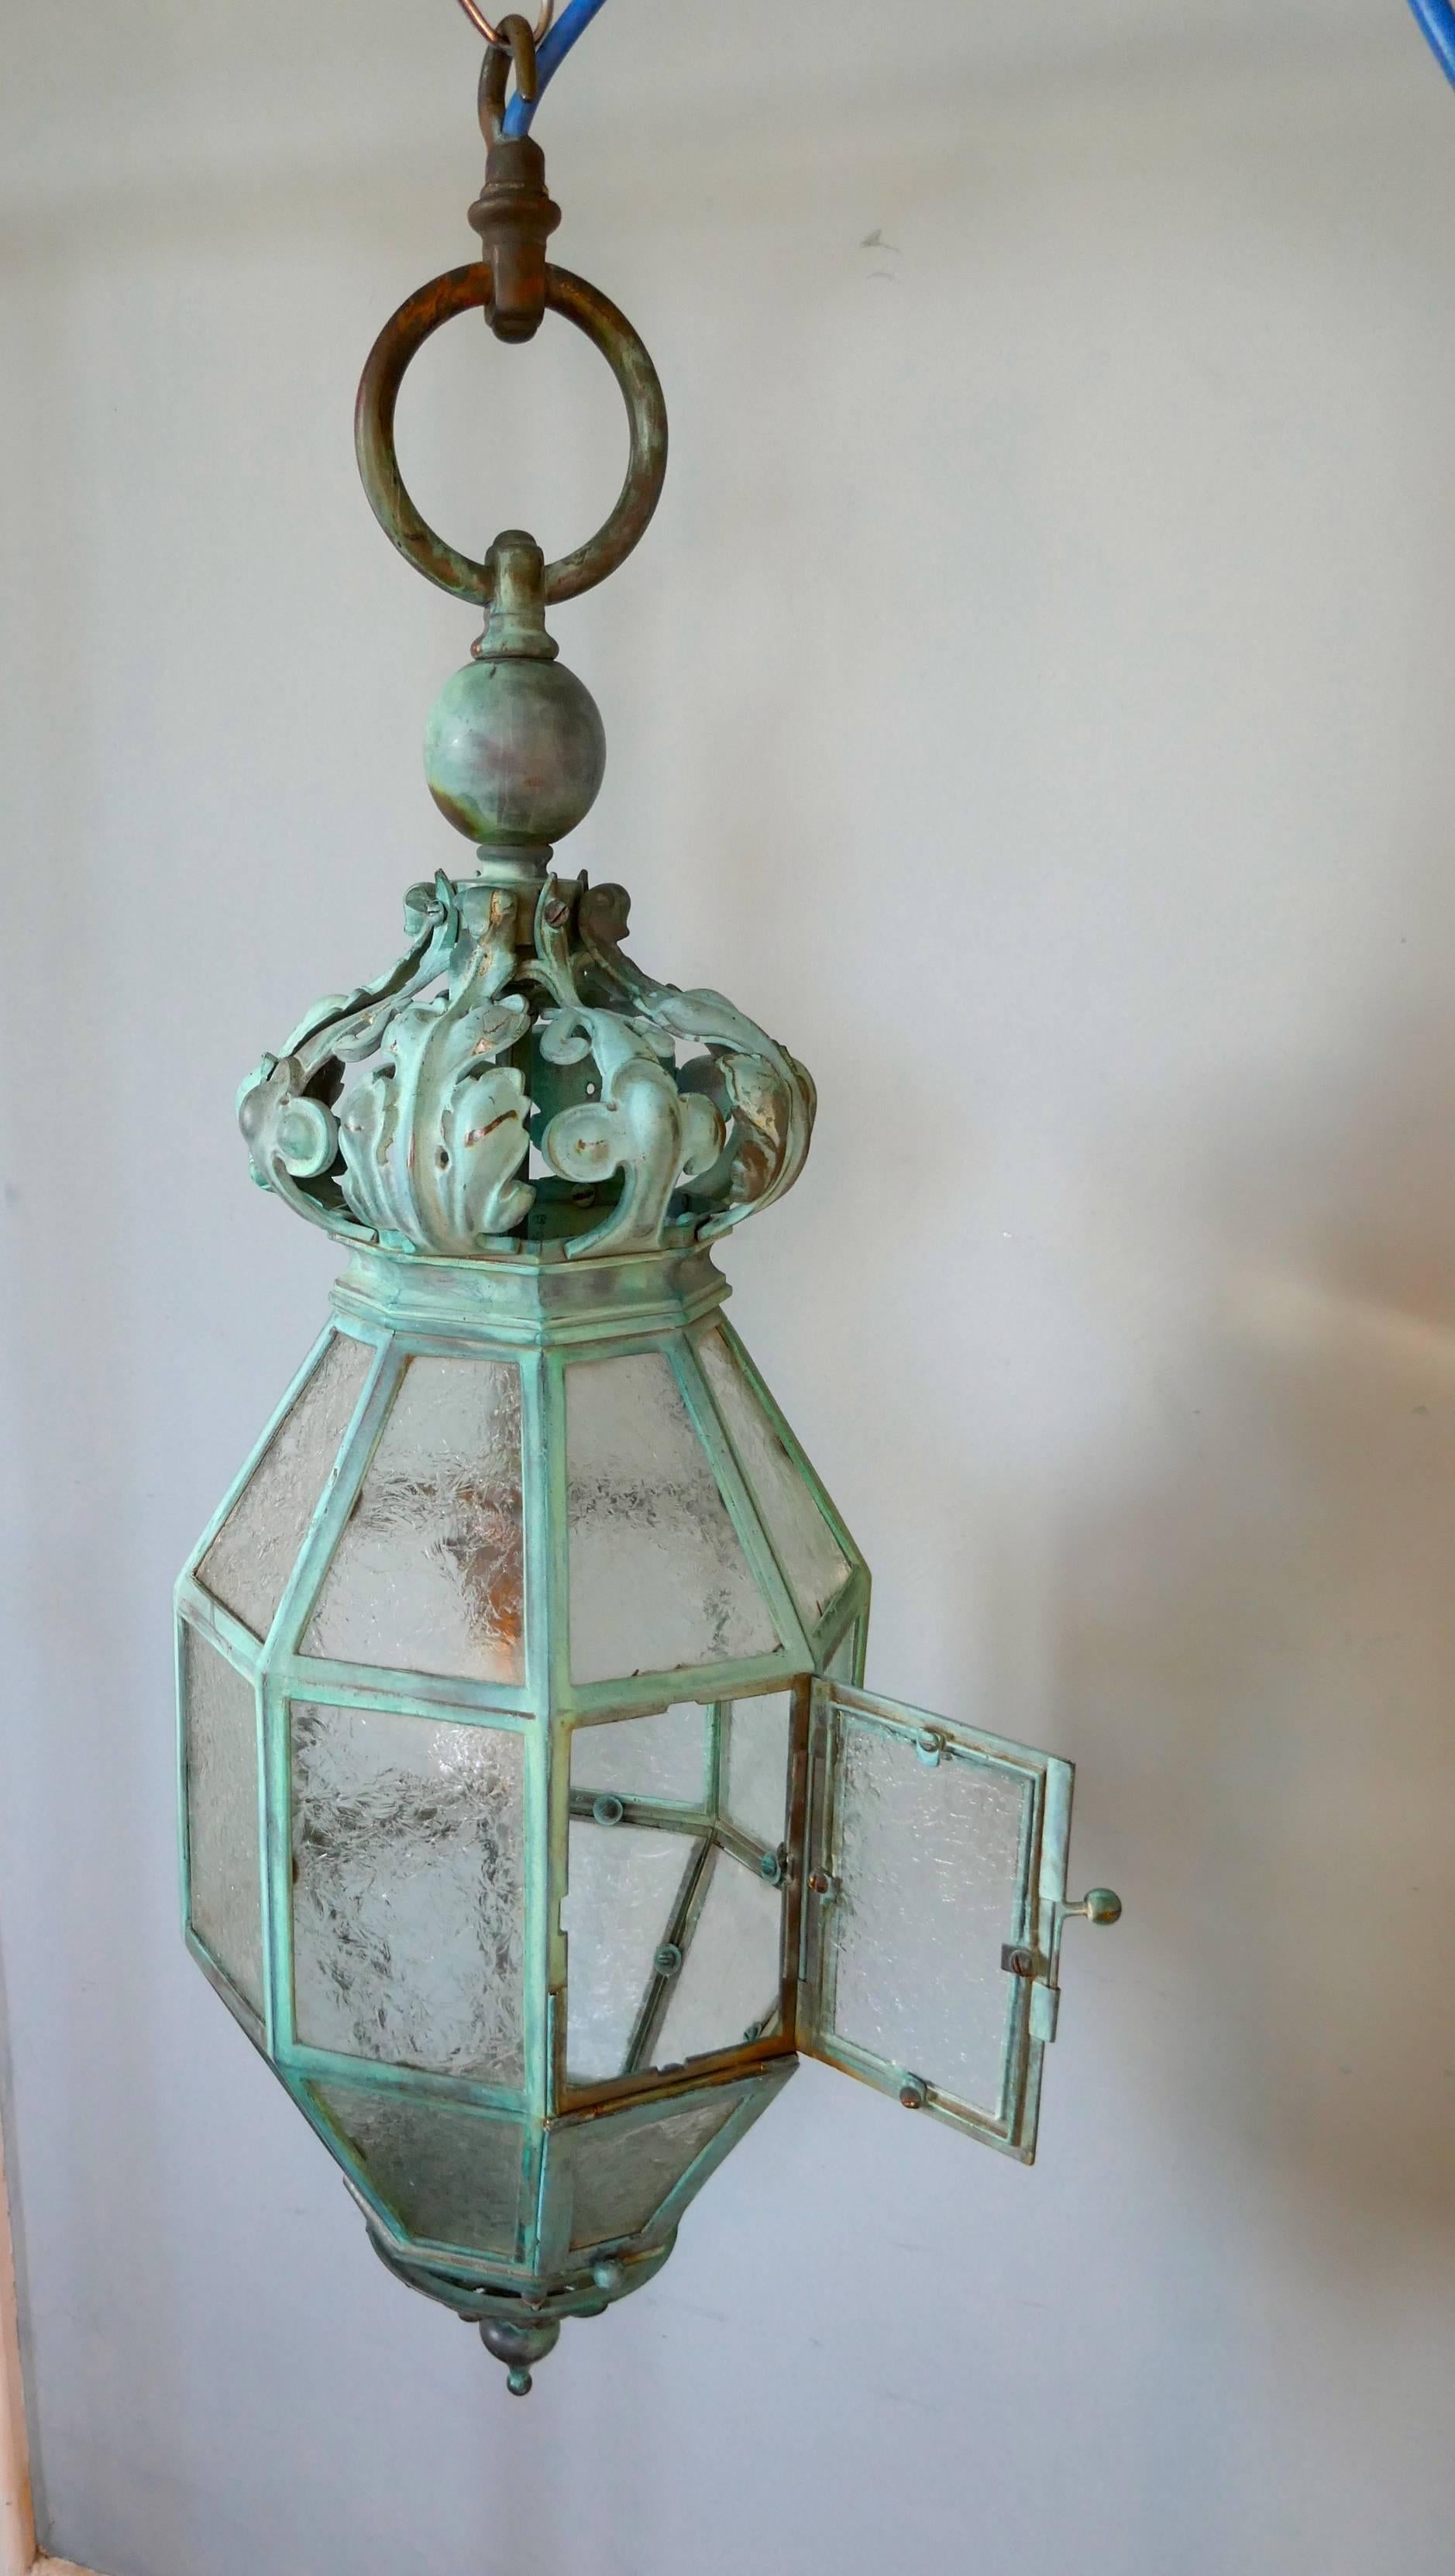 A very large decorative copper lantern

This copper hall lantern has a superb Verdigris patination, the lamp has a wonderful crackled frosted glass set into its eight sides, which sparkles when the light shines through the 24 shaped panes
(one of